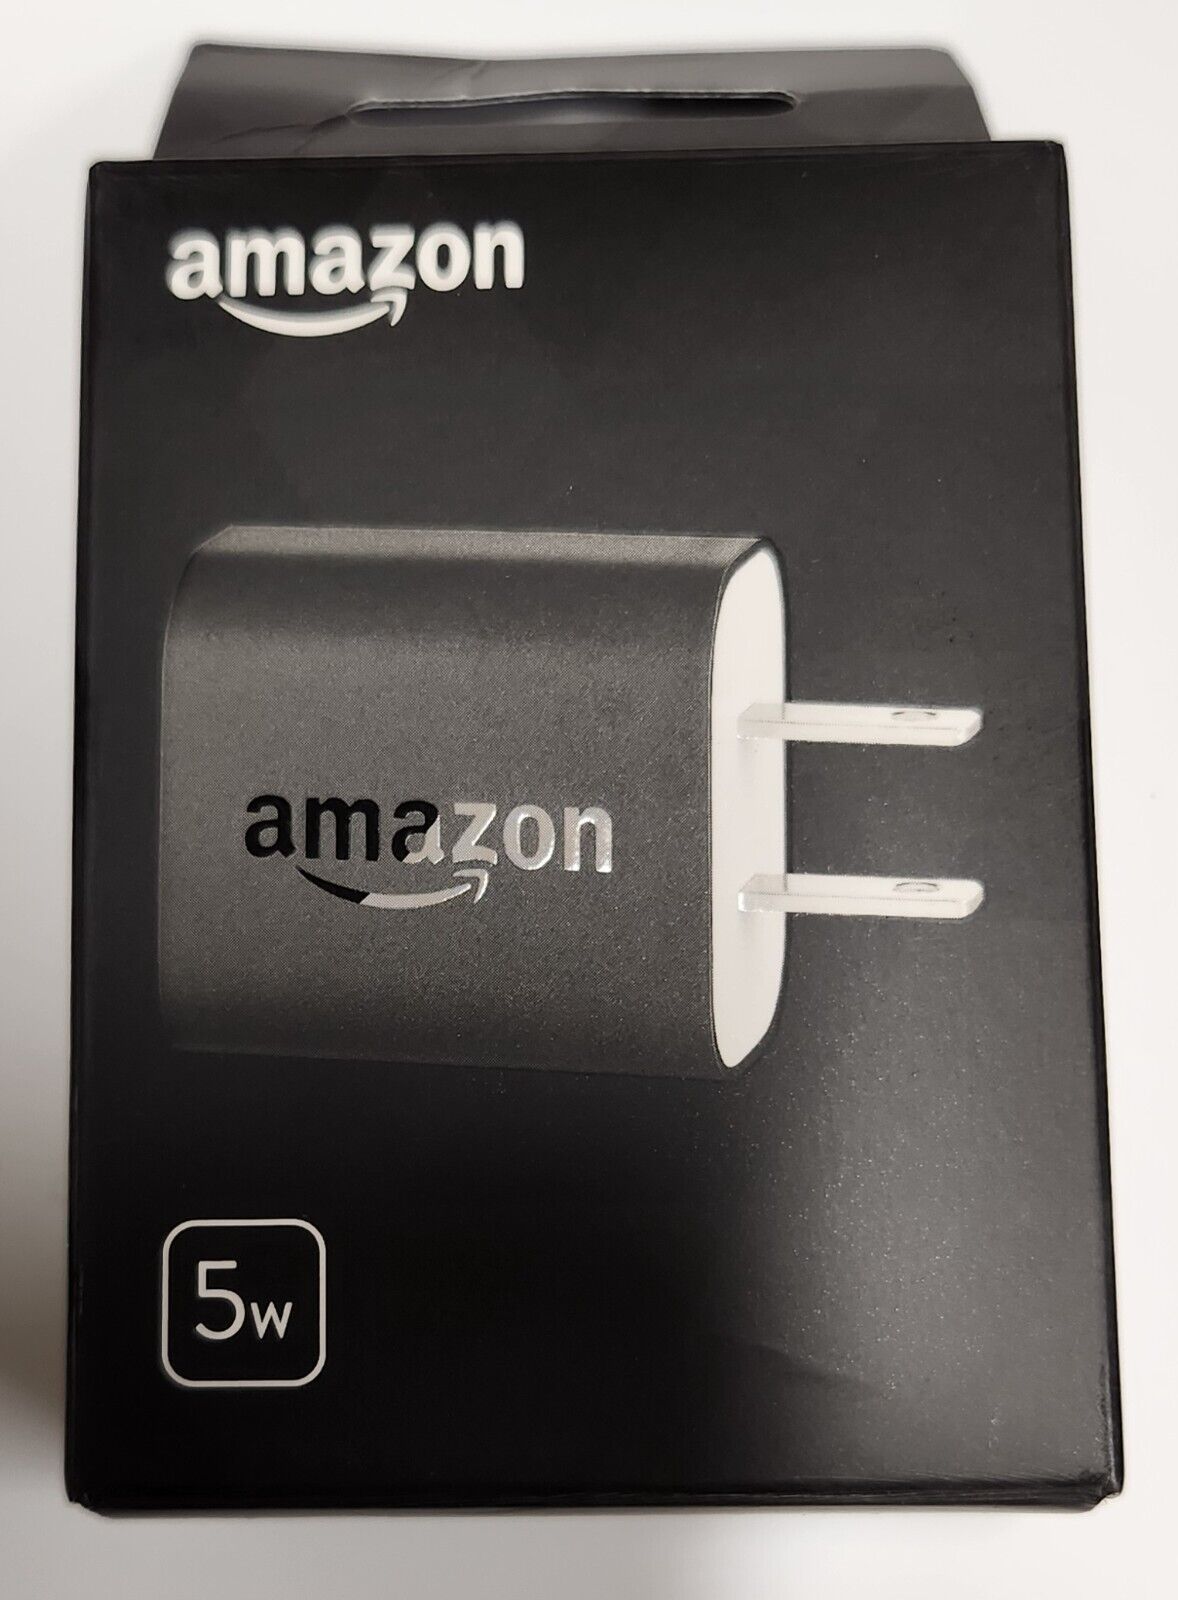 Amazon 5W USB Official OEM Charger and Power Adapter for Fire Tablets and Kindle